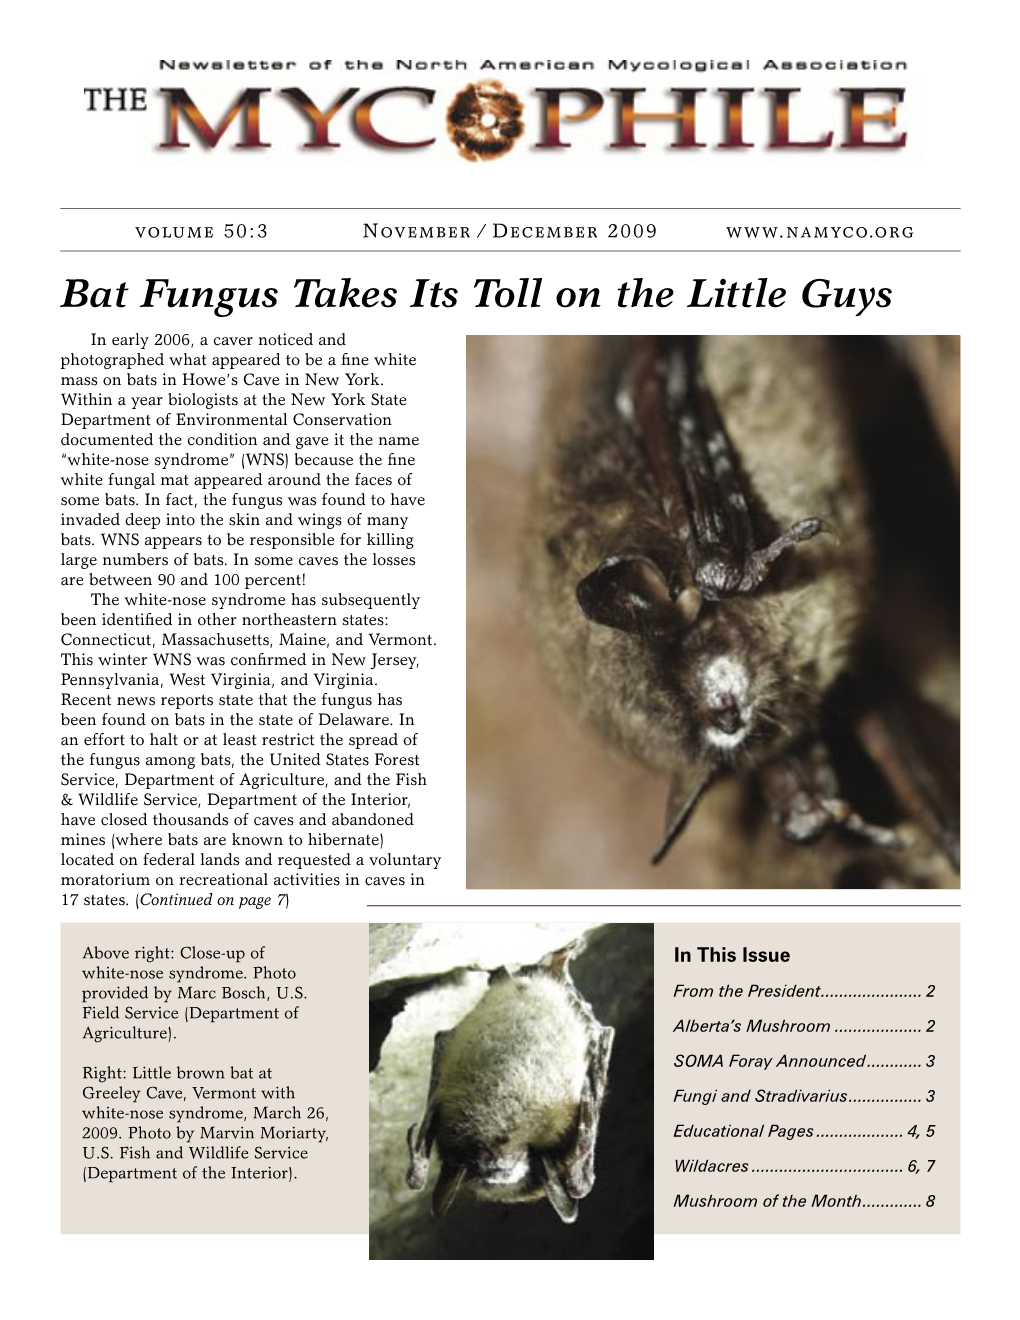 Bat Fungus Takes Its Toll on the Little Guys in Early 2006, a Caver Noticed and Photographed What Appeared to Be a Fine White Mass on Bats in Howe’S Cave in New York